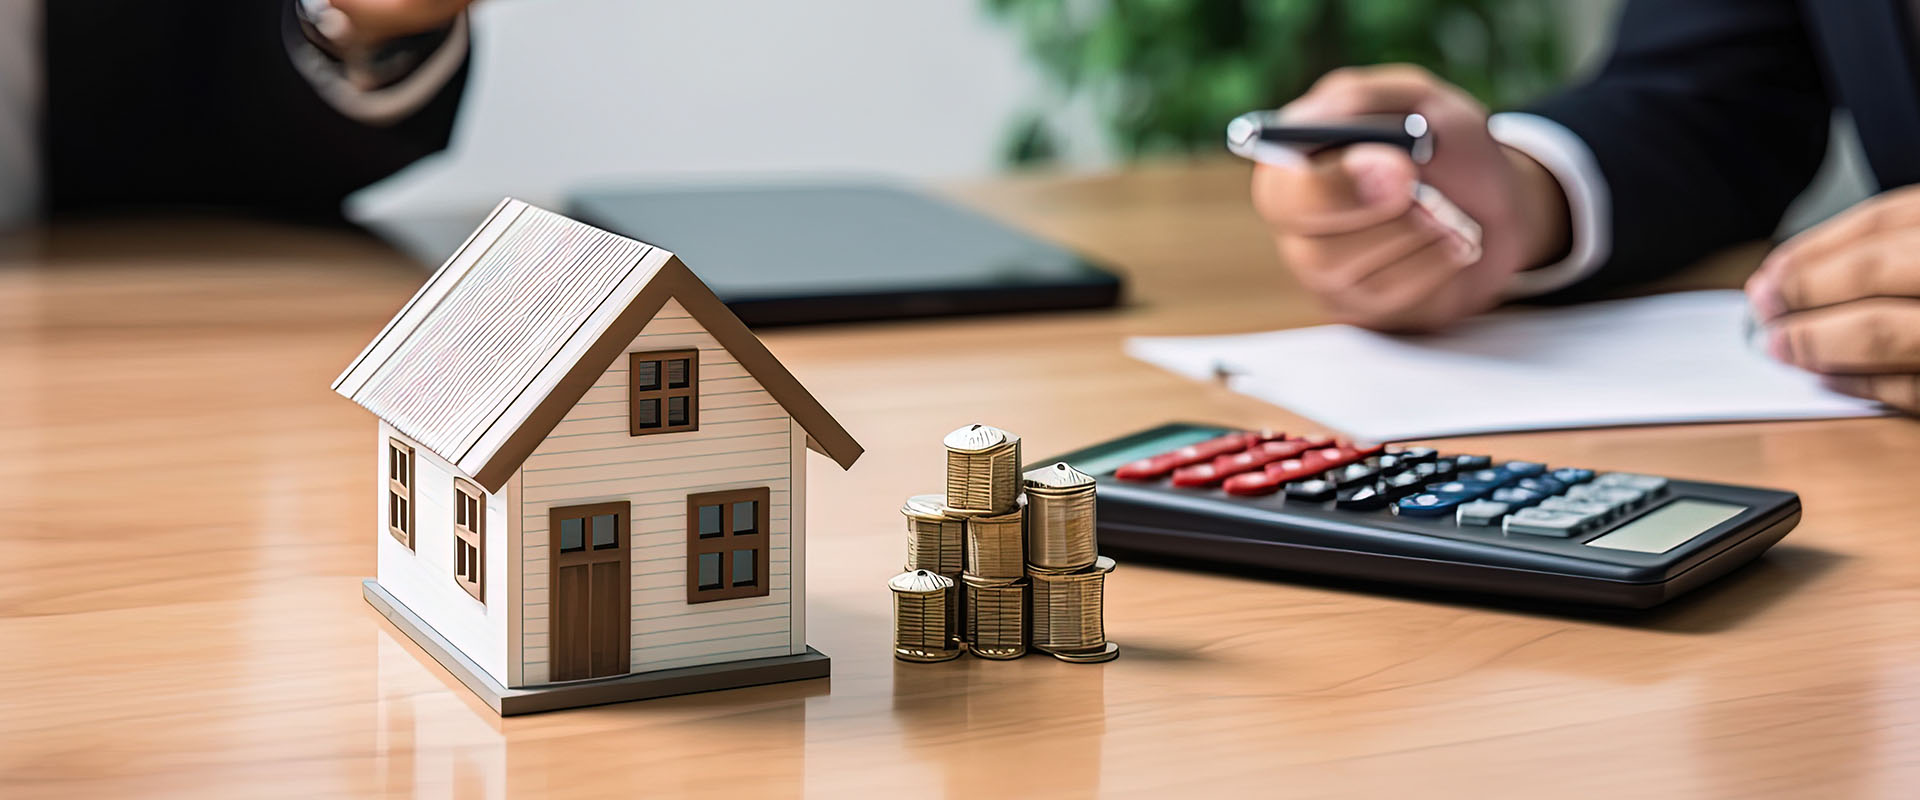 Finance options for buyers you may not know about